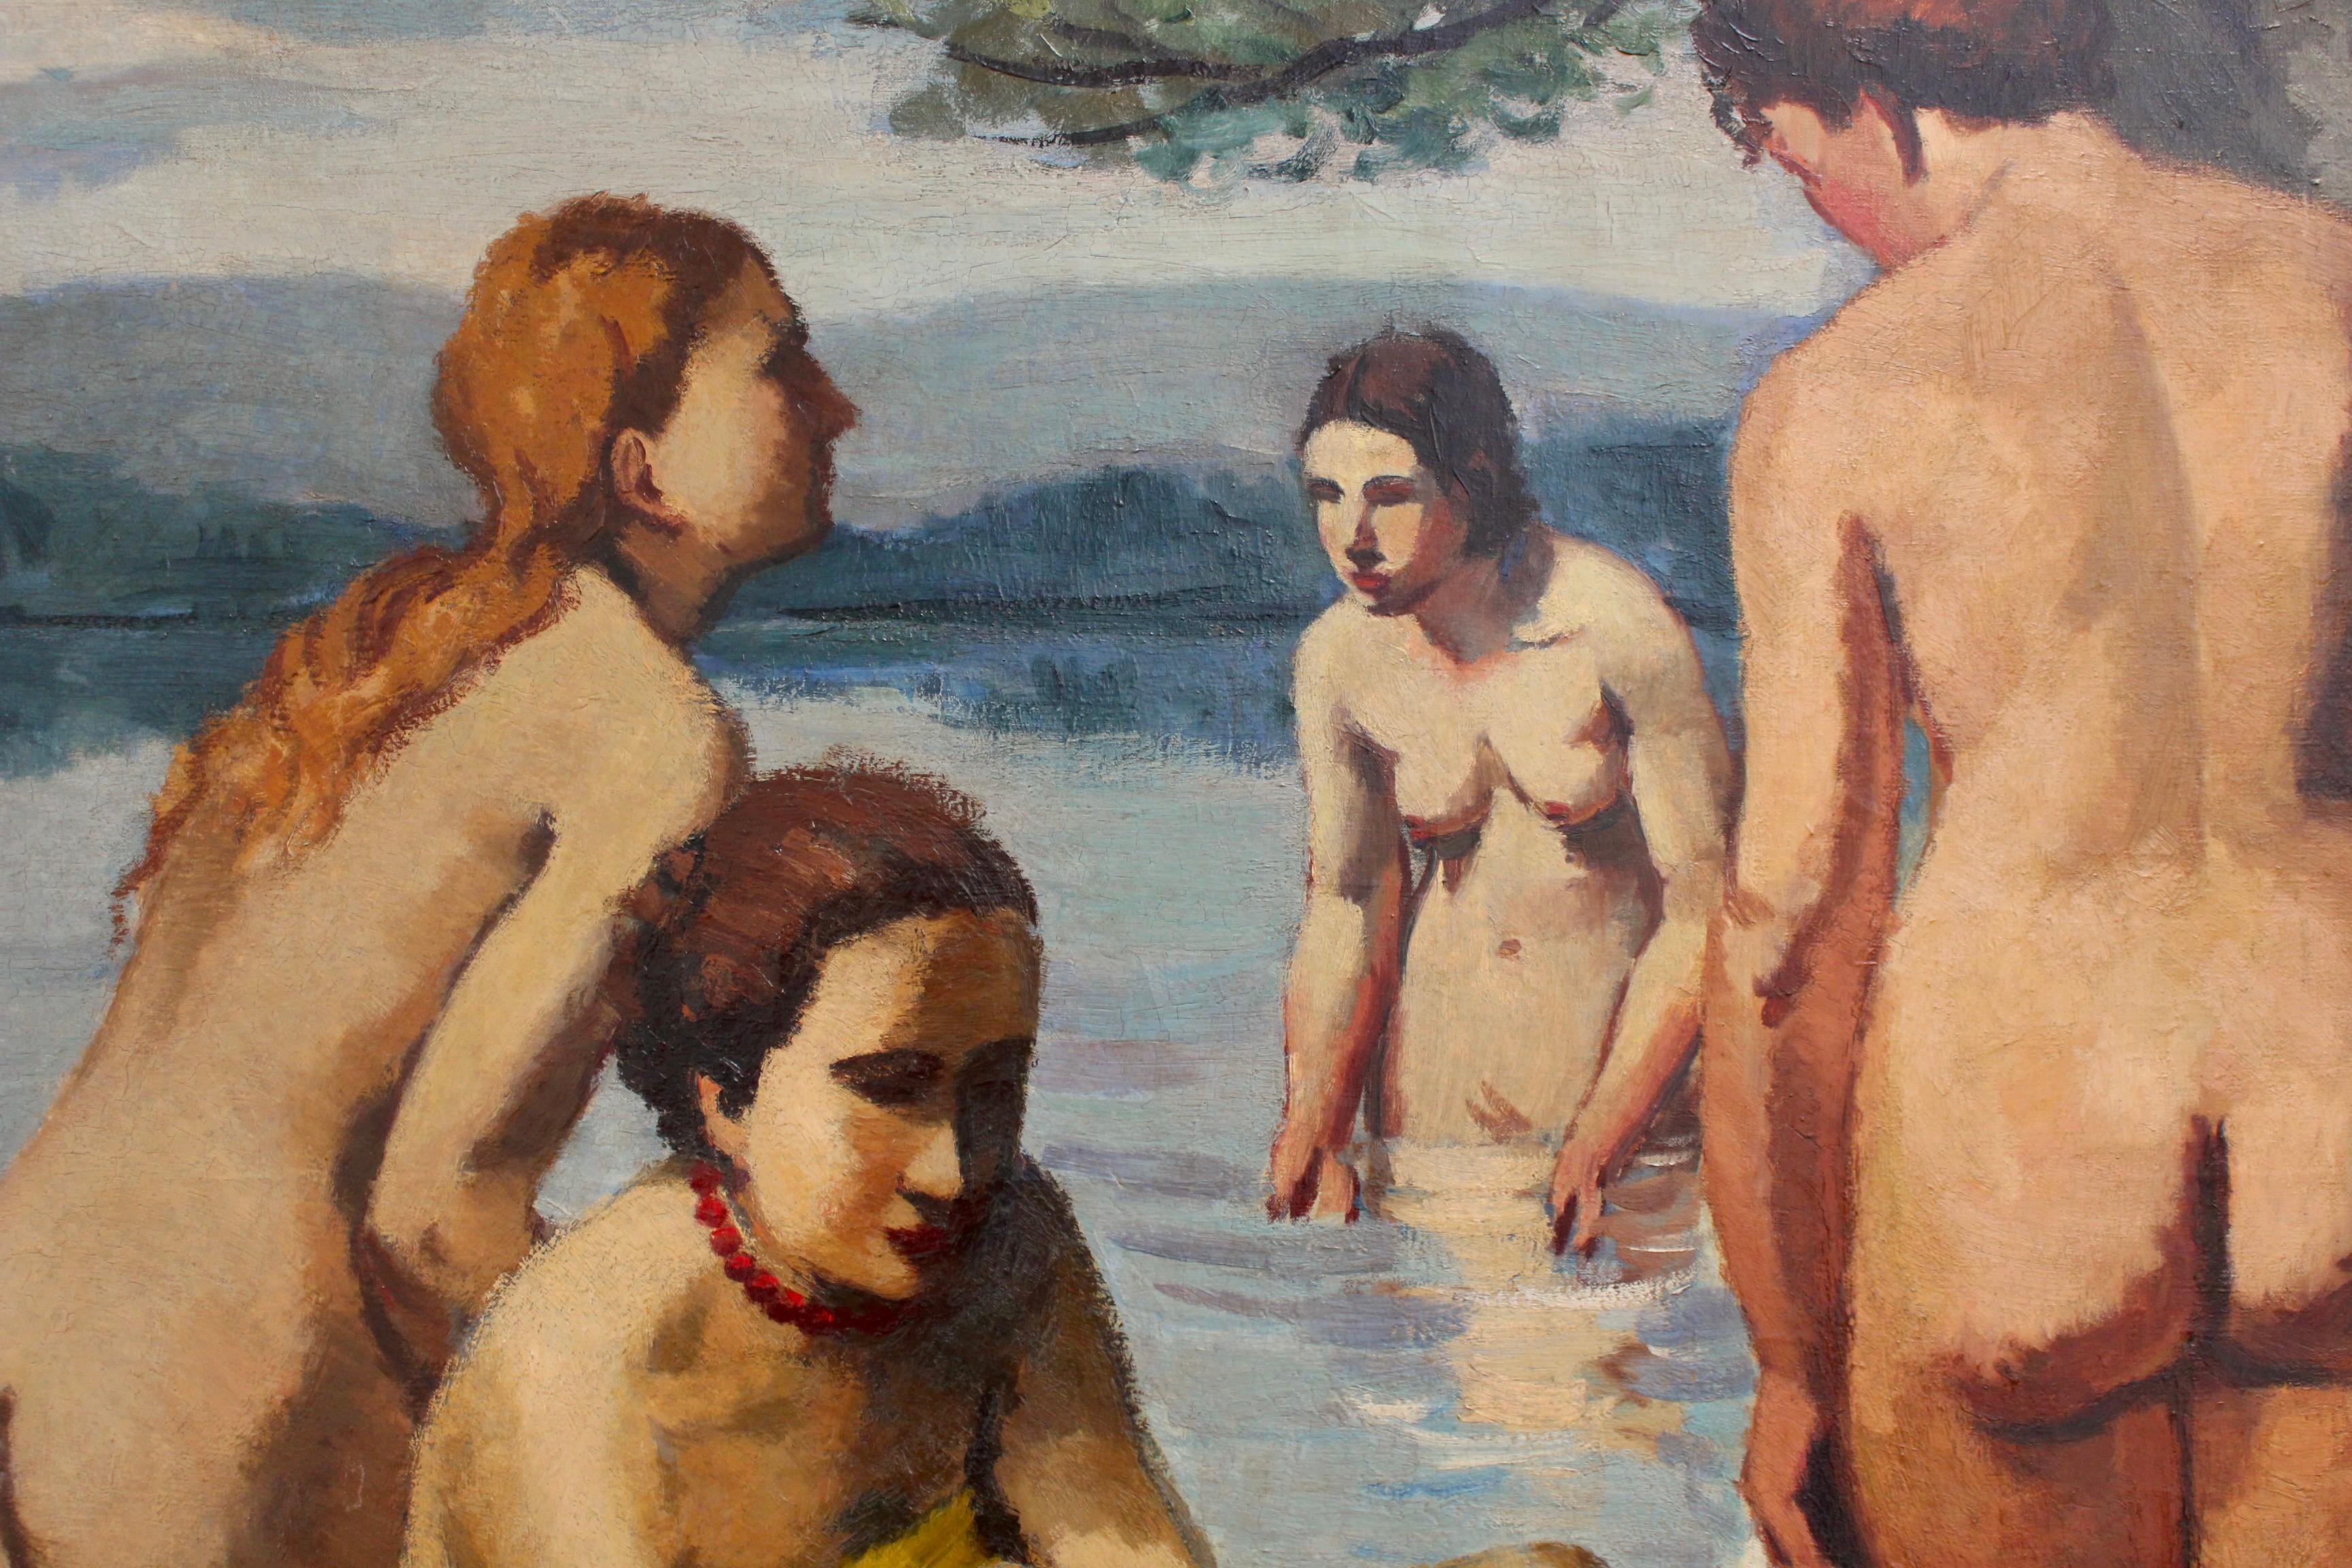 'The Bathers', oil on canvas, by Charles Kvapil (circa 1920s). The world of art has for centuries depicted bathers in one form or another. Kvapil's version, inspired by Courbet and Cézanne, is wonderfully alluring. Four nudes appear near a secluded